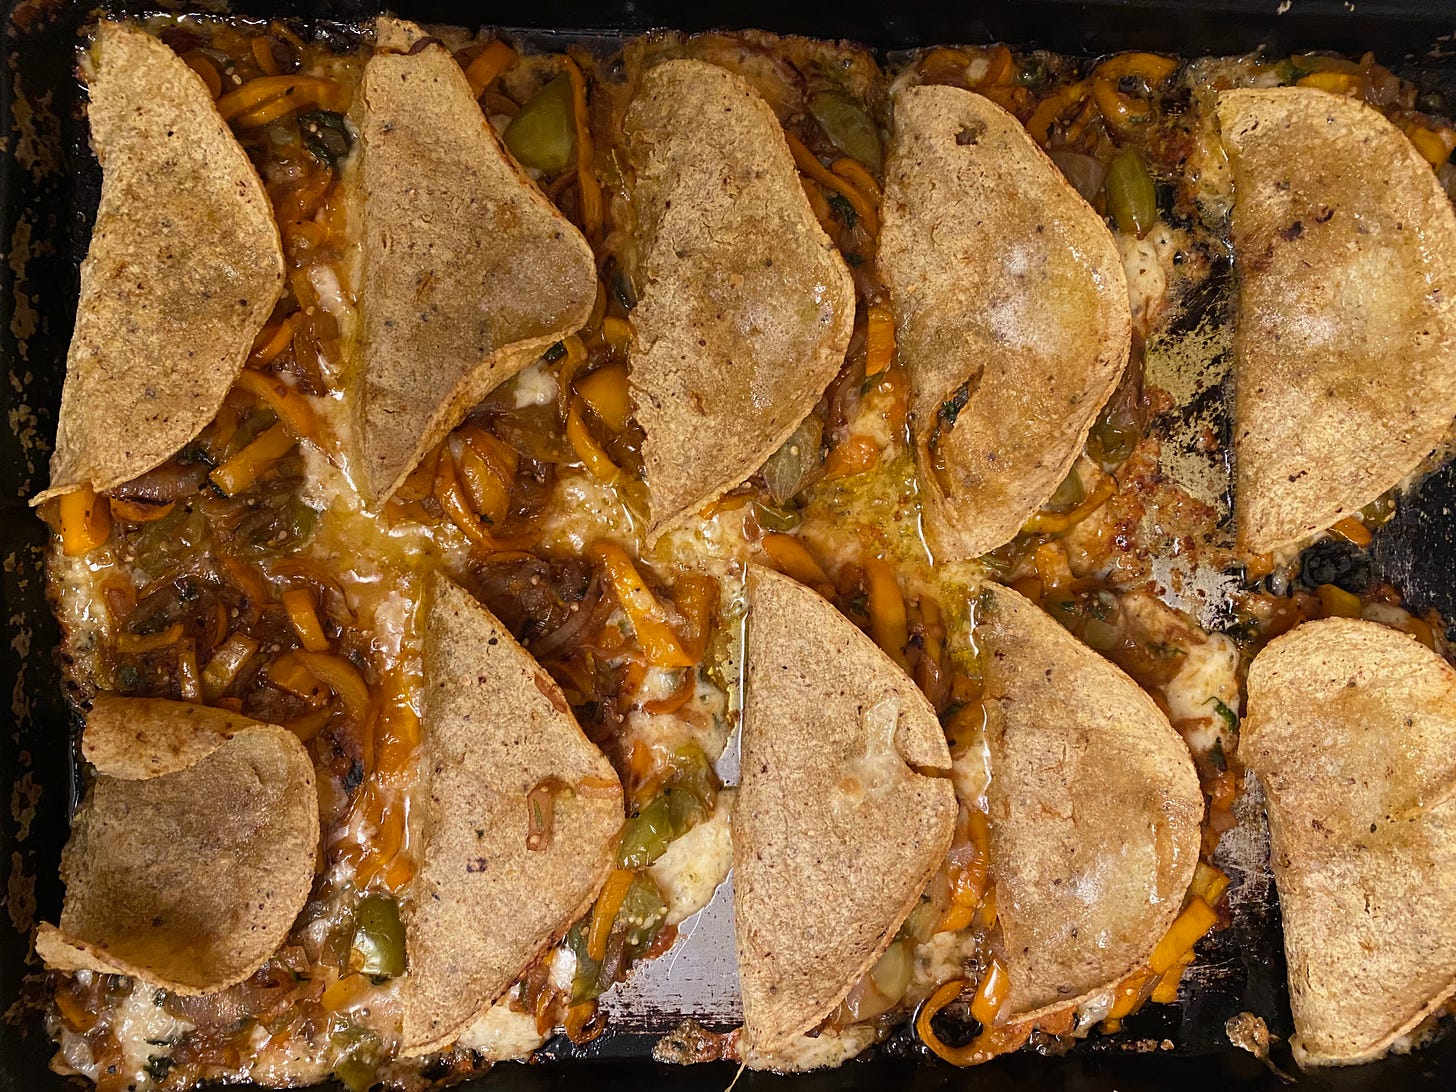 A tray of ten baked quesadillas. Half-moon shaped corn tortillas slightly overlap on the pan, the filling is oozing out all around them: slices of yellow peppers, pools of butter, and partially melted cheese.